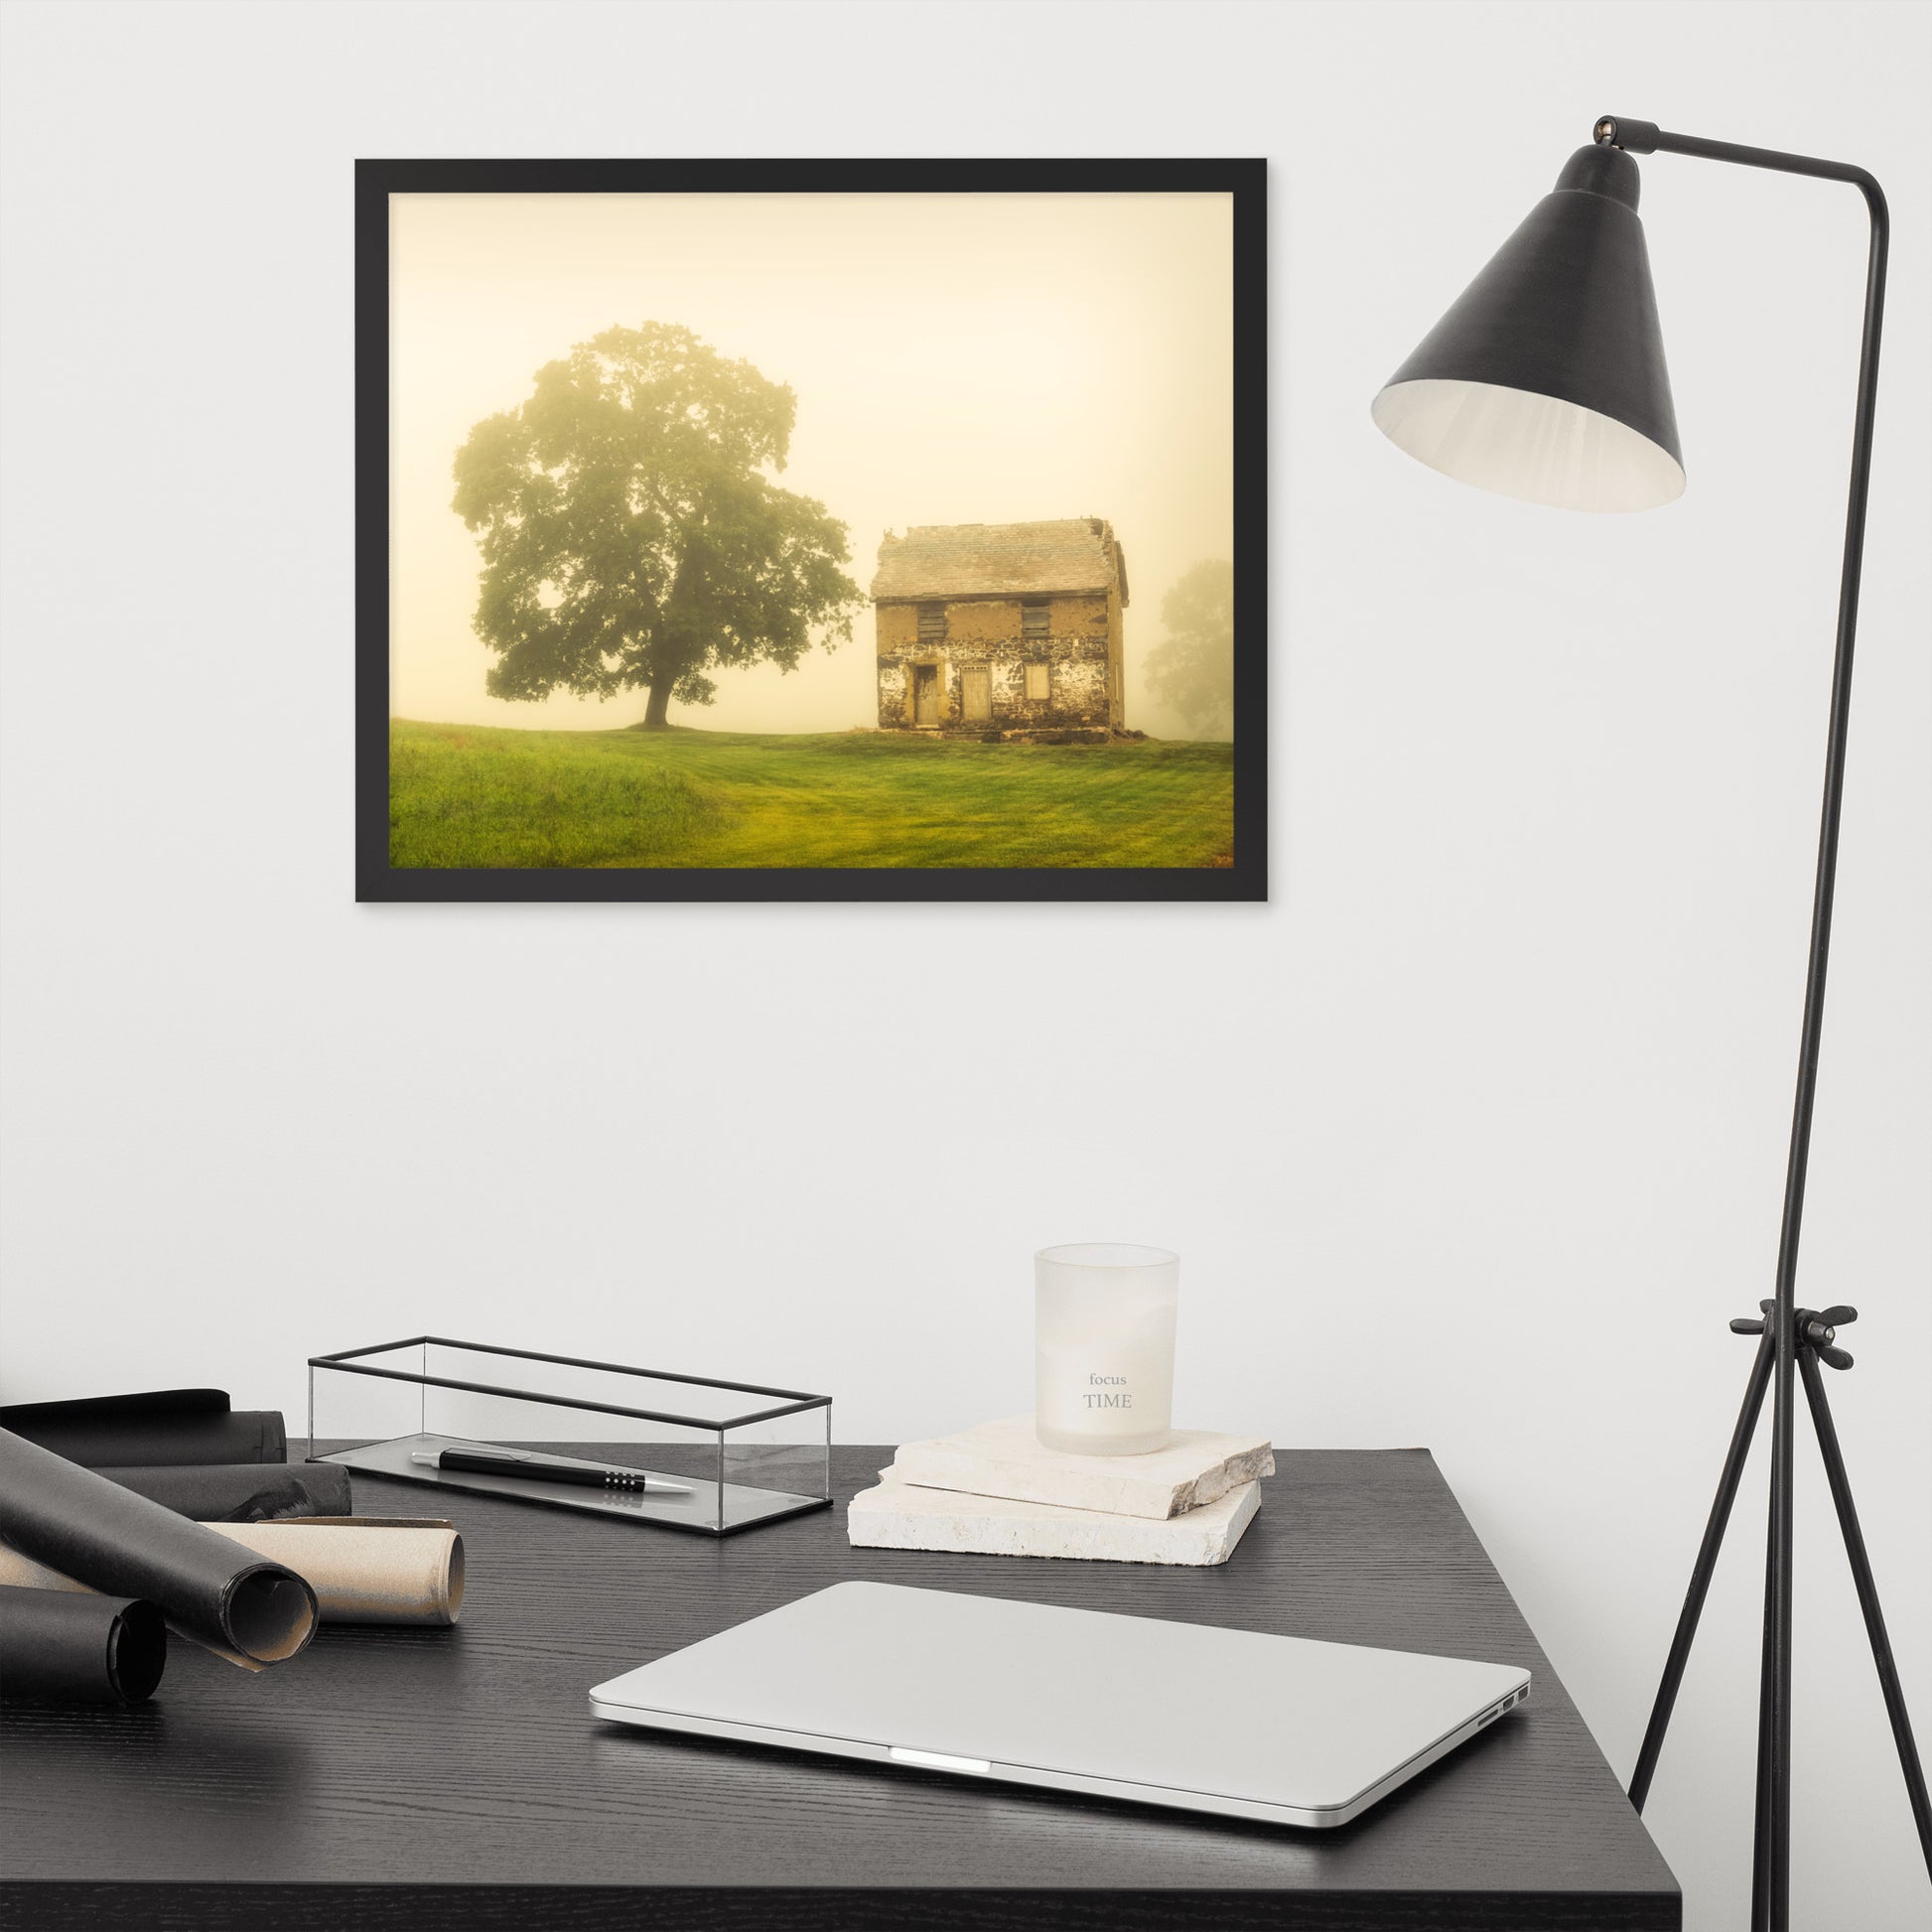 Home Office Art Prints: Abandoned House - Rustic / Rural / Country Style Landscape / Nature Framed Photo Paper Wall Art Prints - Artwork - Wall Decor